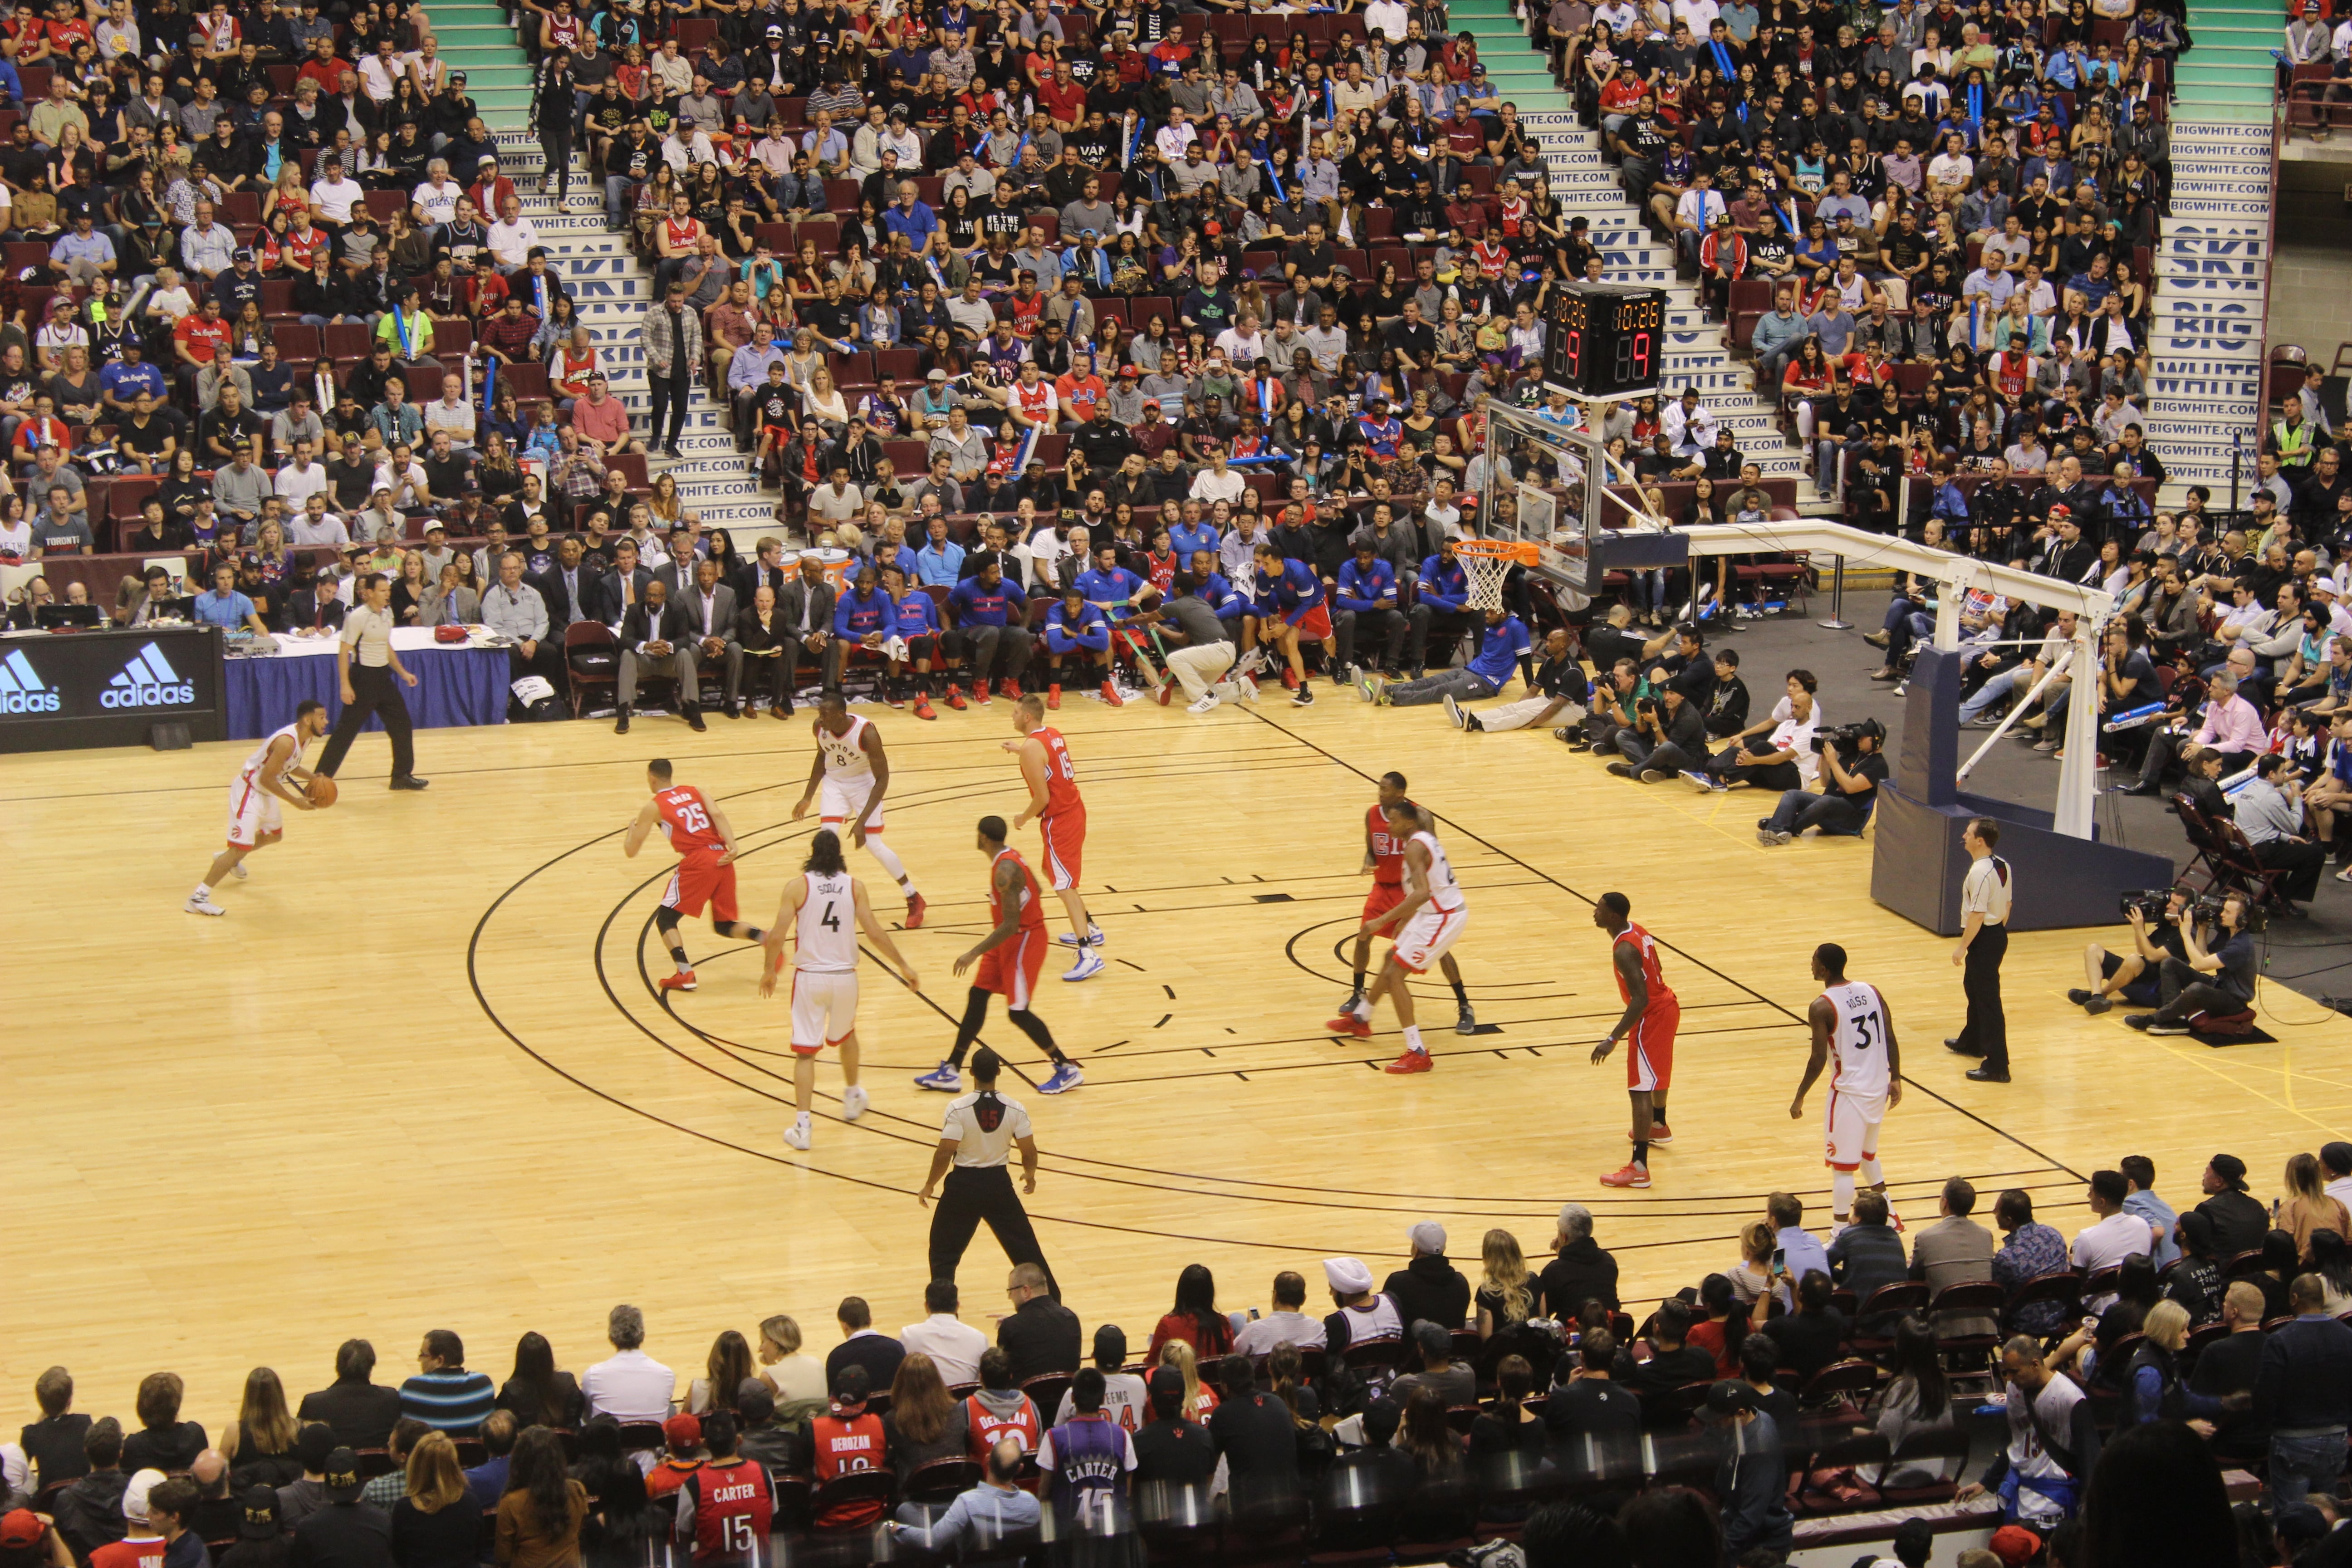 21 Courtside Photos From The Raptors VS Clippers In Vancouver